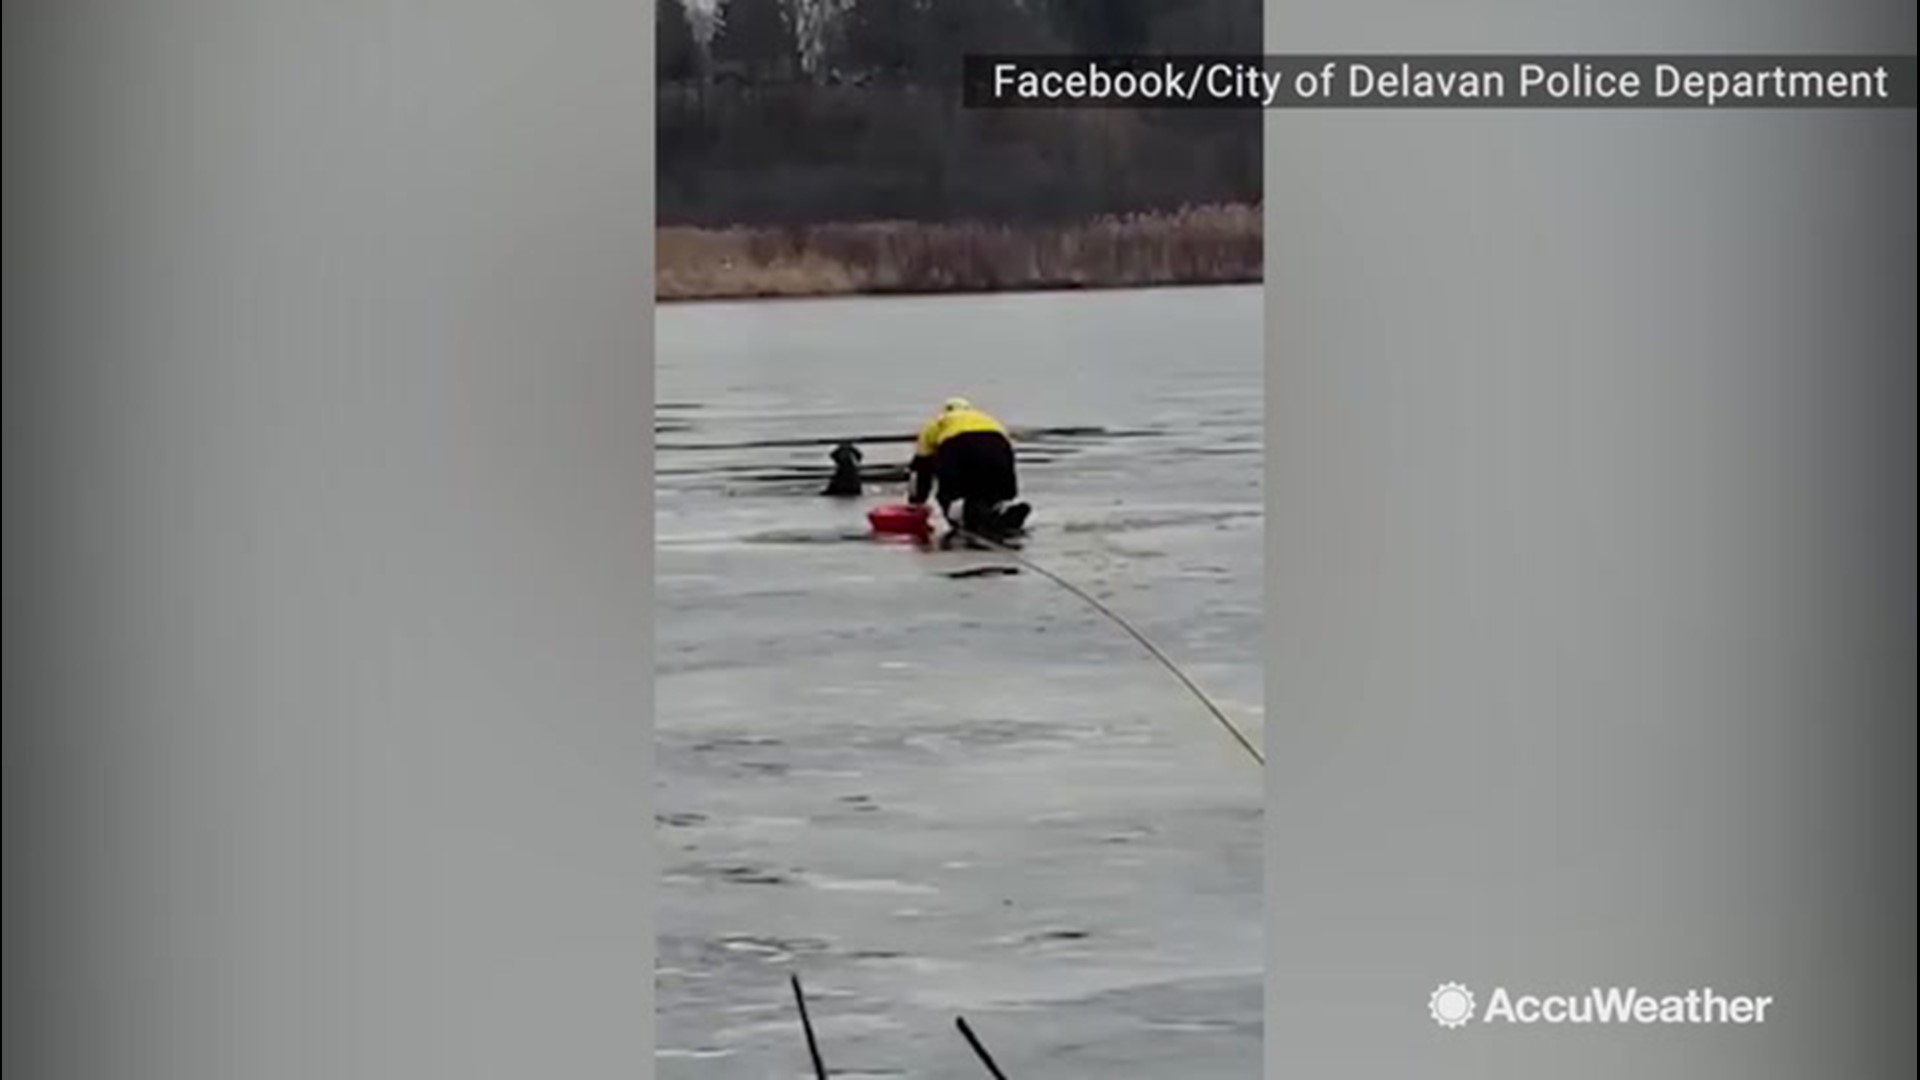 A police officer in Delavan, Wisconsin, rescued a dog that had fallen through the ice at Comus Lake on Christmas Eve, Dec. 24. The dog was rescued and returned to its owner for a Christmas reunion.